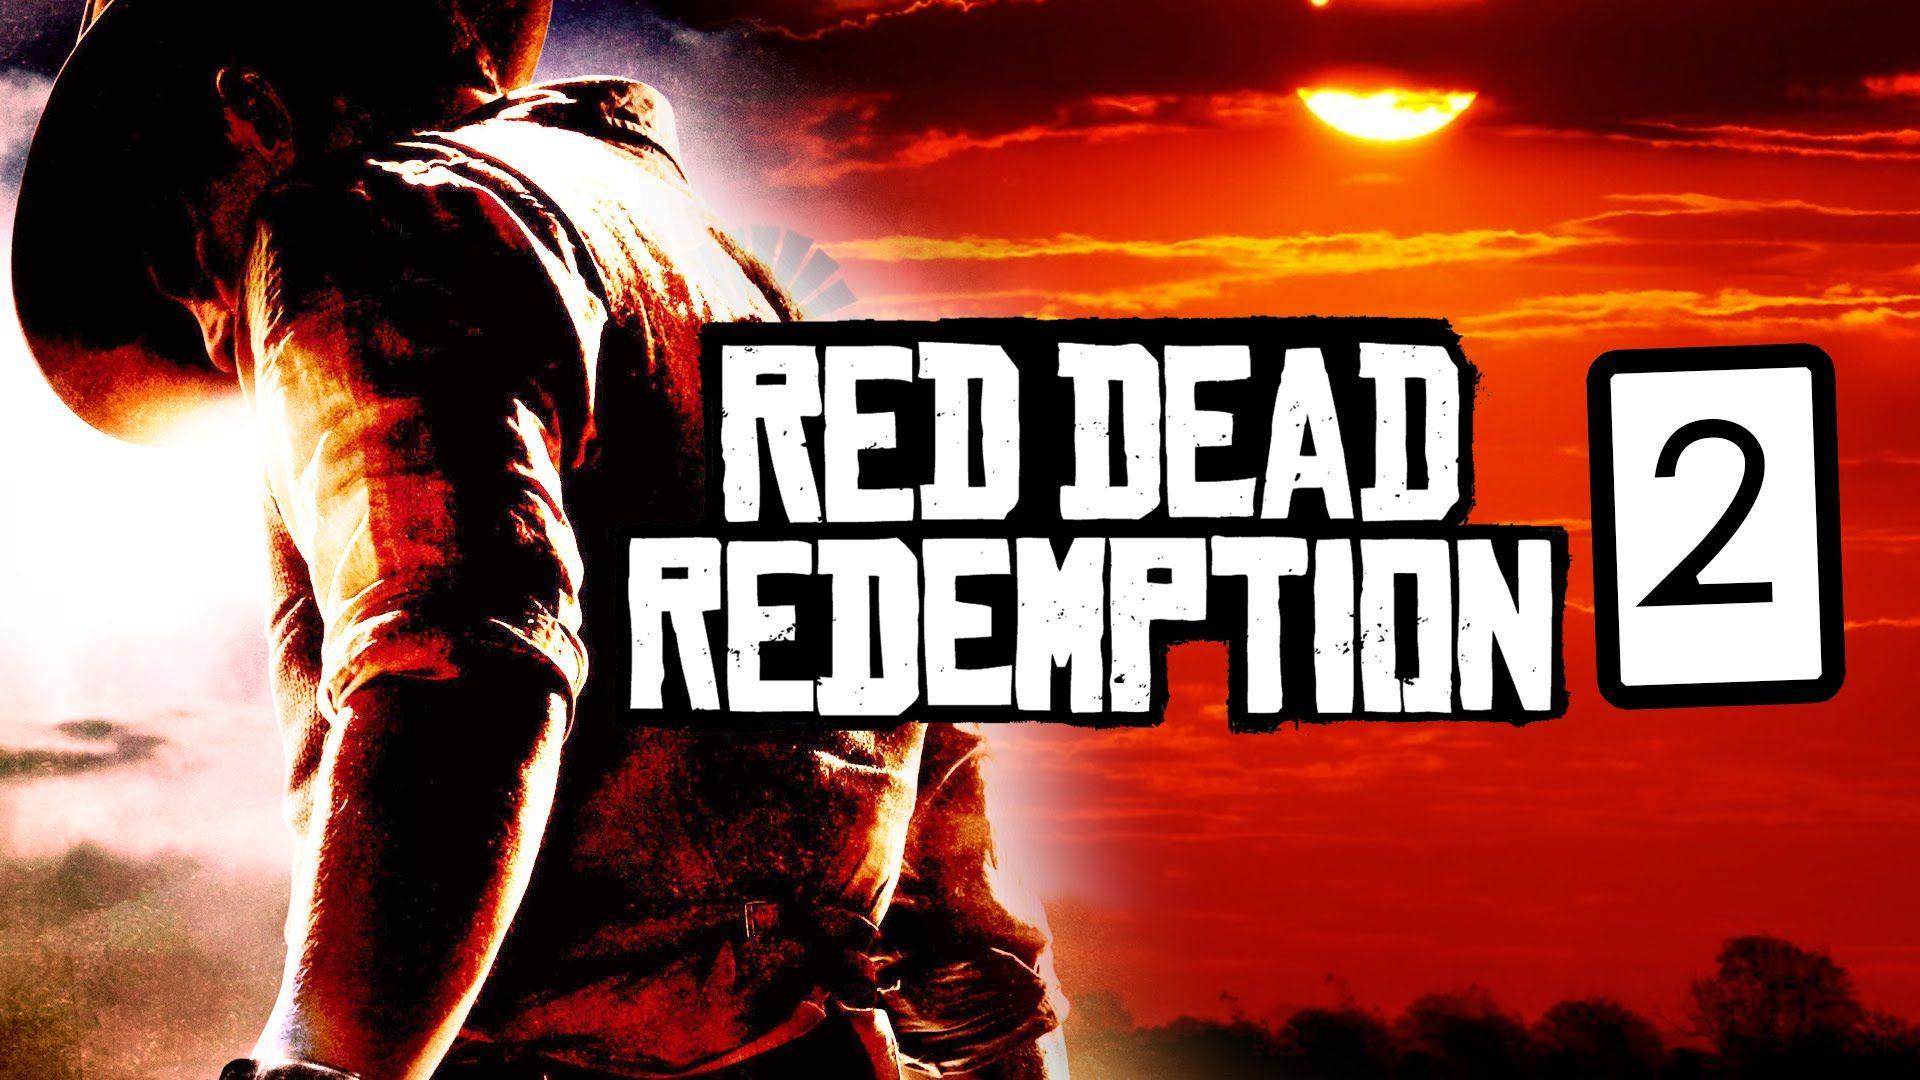 Red Dead Redemption 2 Full HD Wallpaper and Backgroundx1080